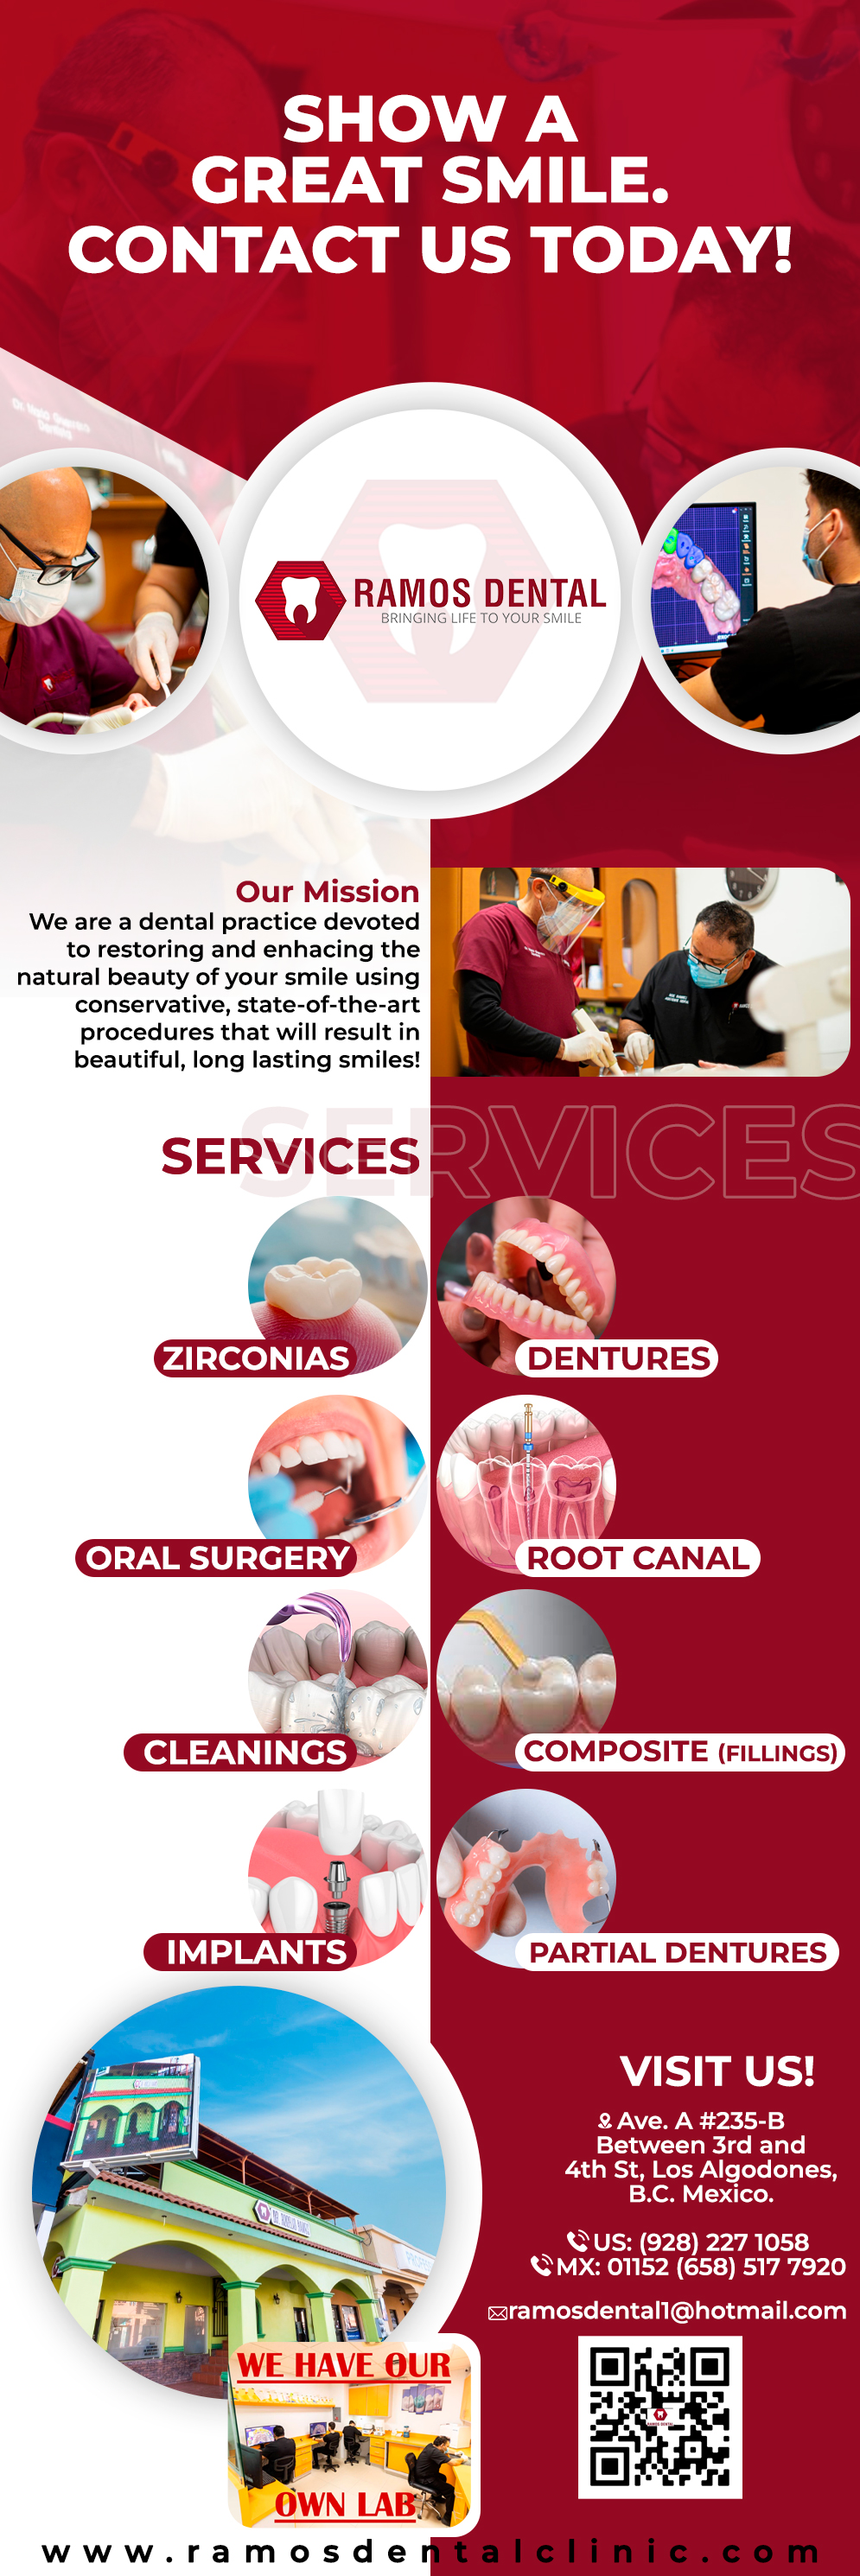 RAMOS DENTAL Dr. Rogelio Ramos DDS-RAMOS DENTAL Where Quality is a Given. Services:               
• Cosmetic Dentistry                   
• Oral Surgery                         • Dental Implants                         • Extractions
• Dentures                               •  Partial Dentures                       •  Crowns                               • Fillings                                      • Cleanings
      • Endodontics (root canal)  
• Gum Disease   
                                           